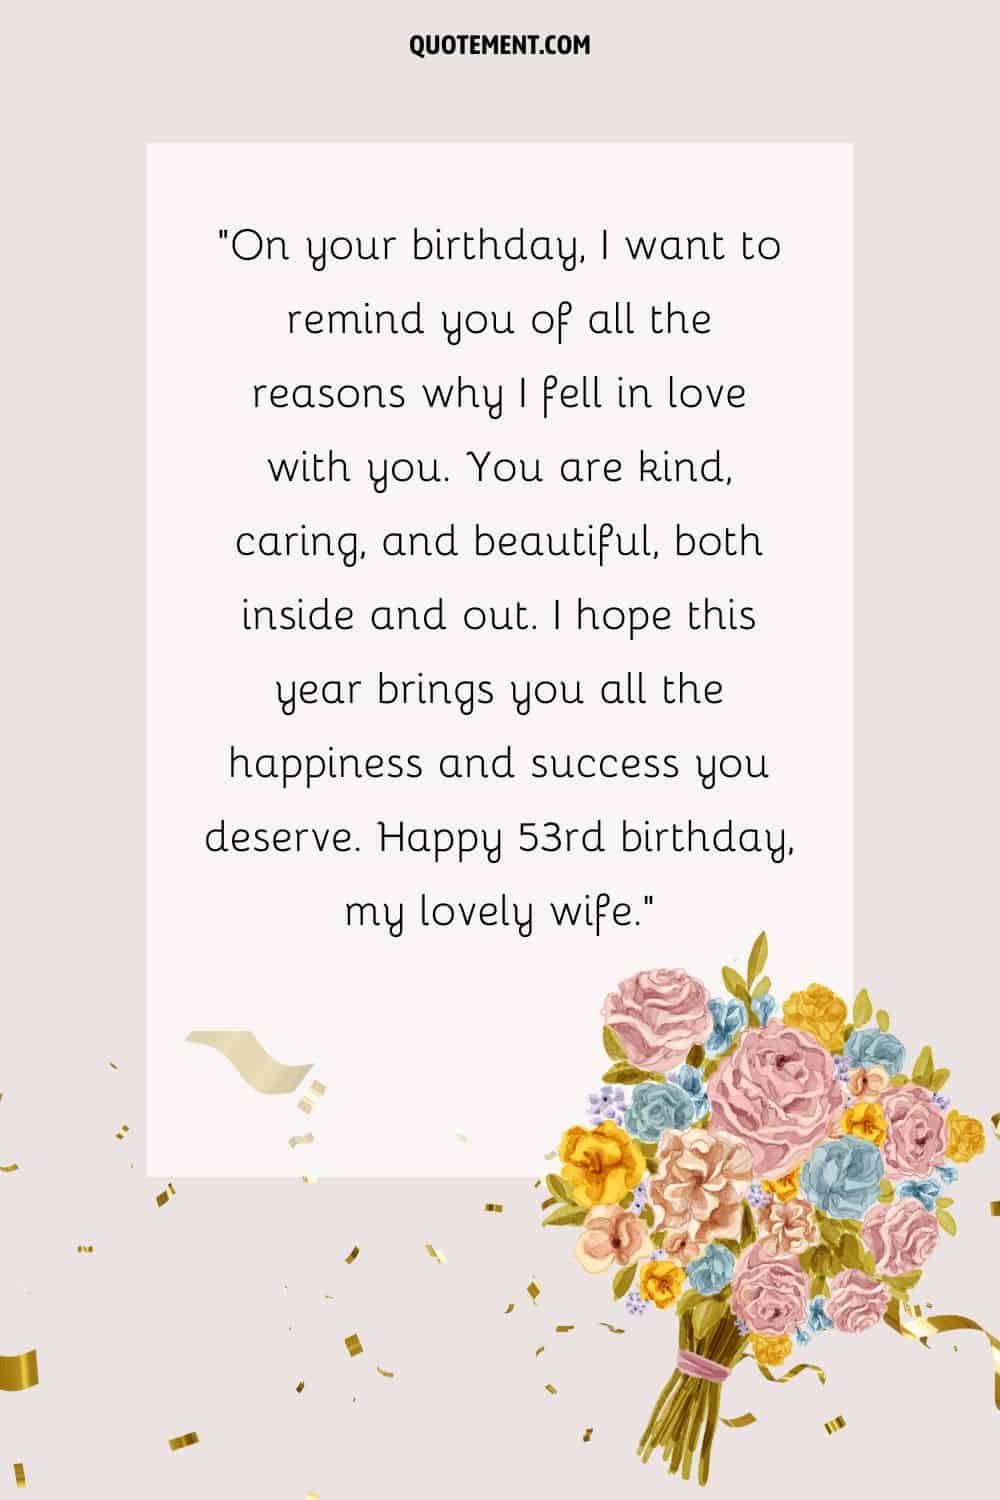 Romantic message for a wife's 53rd birthday, a rose bouquet and confetti